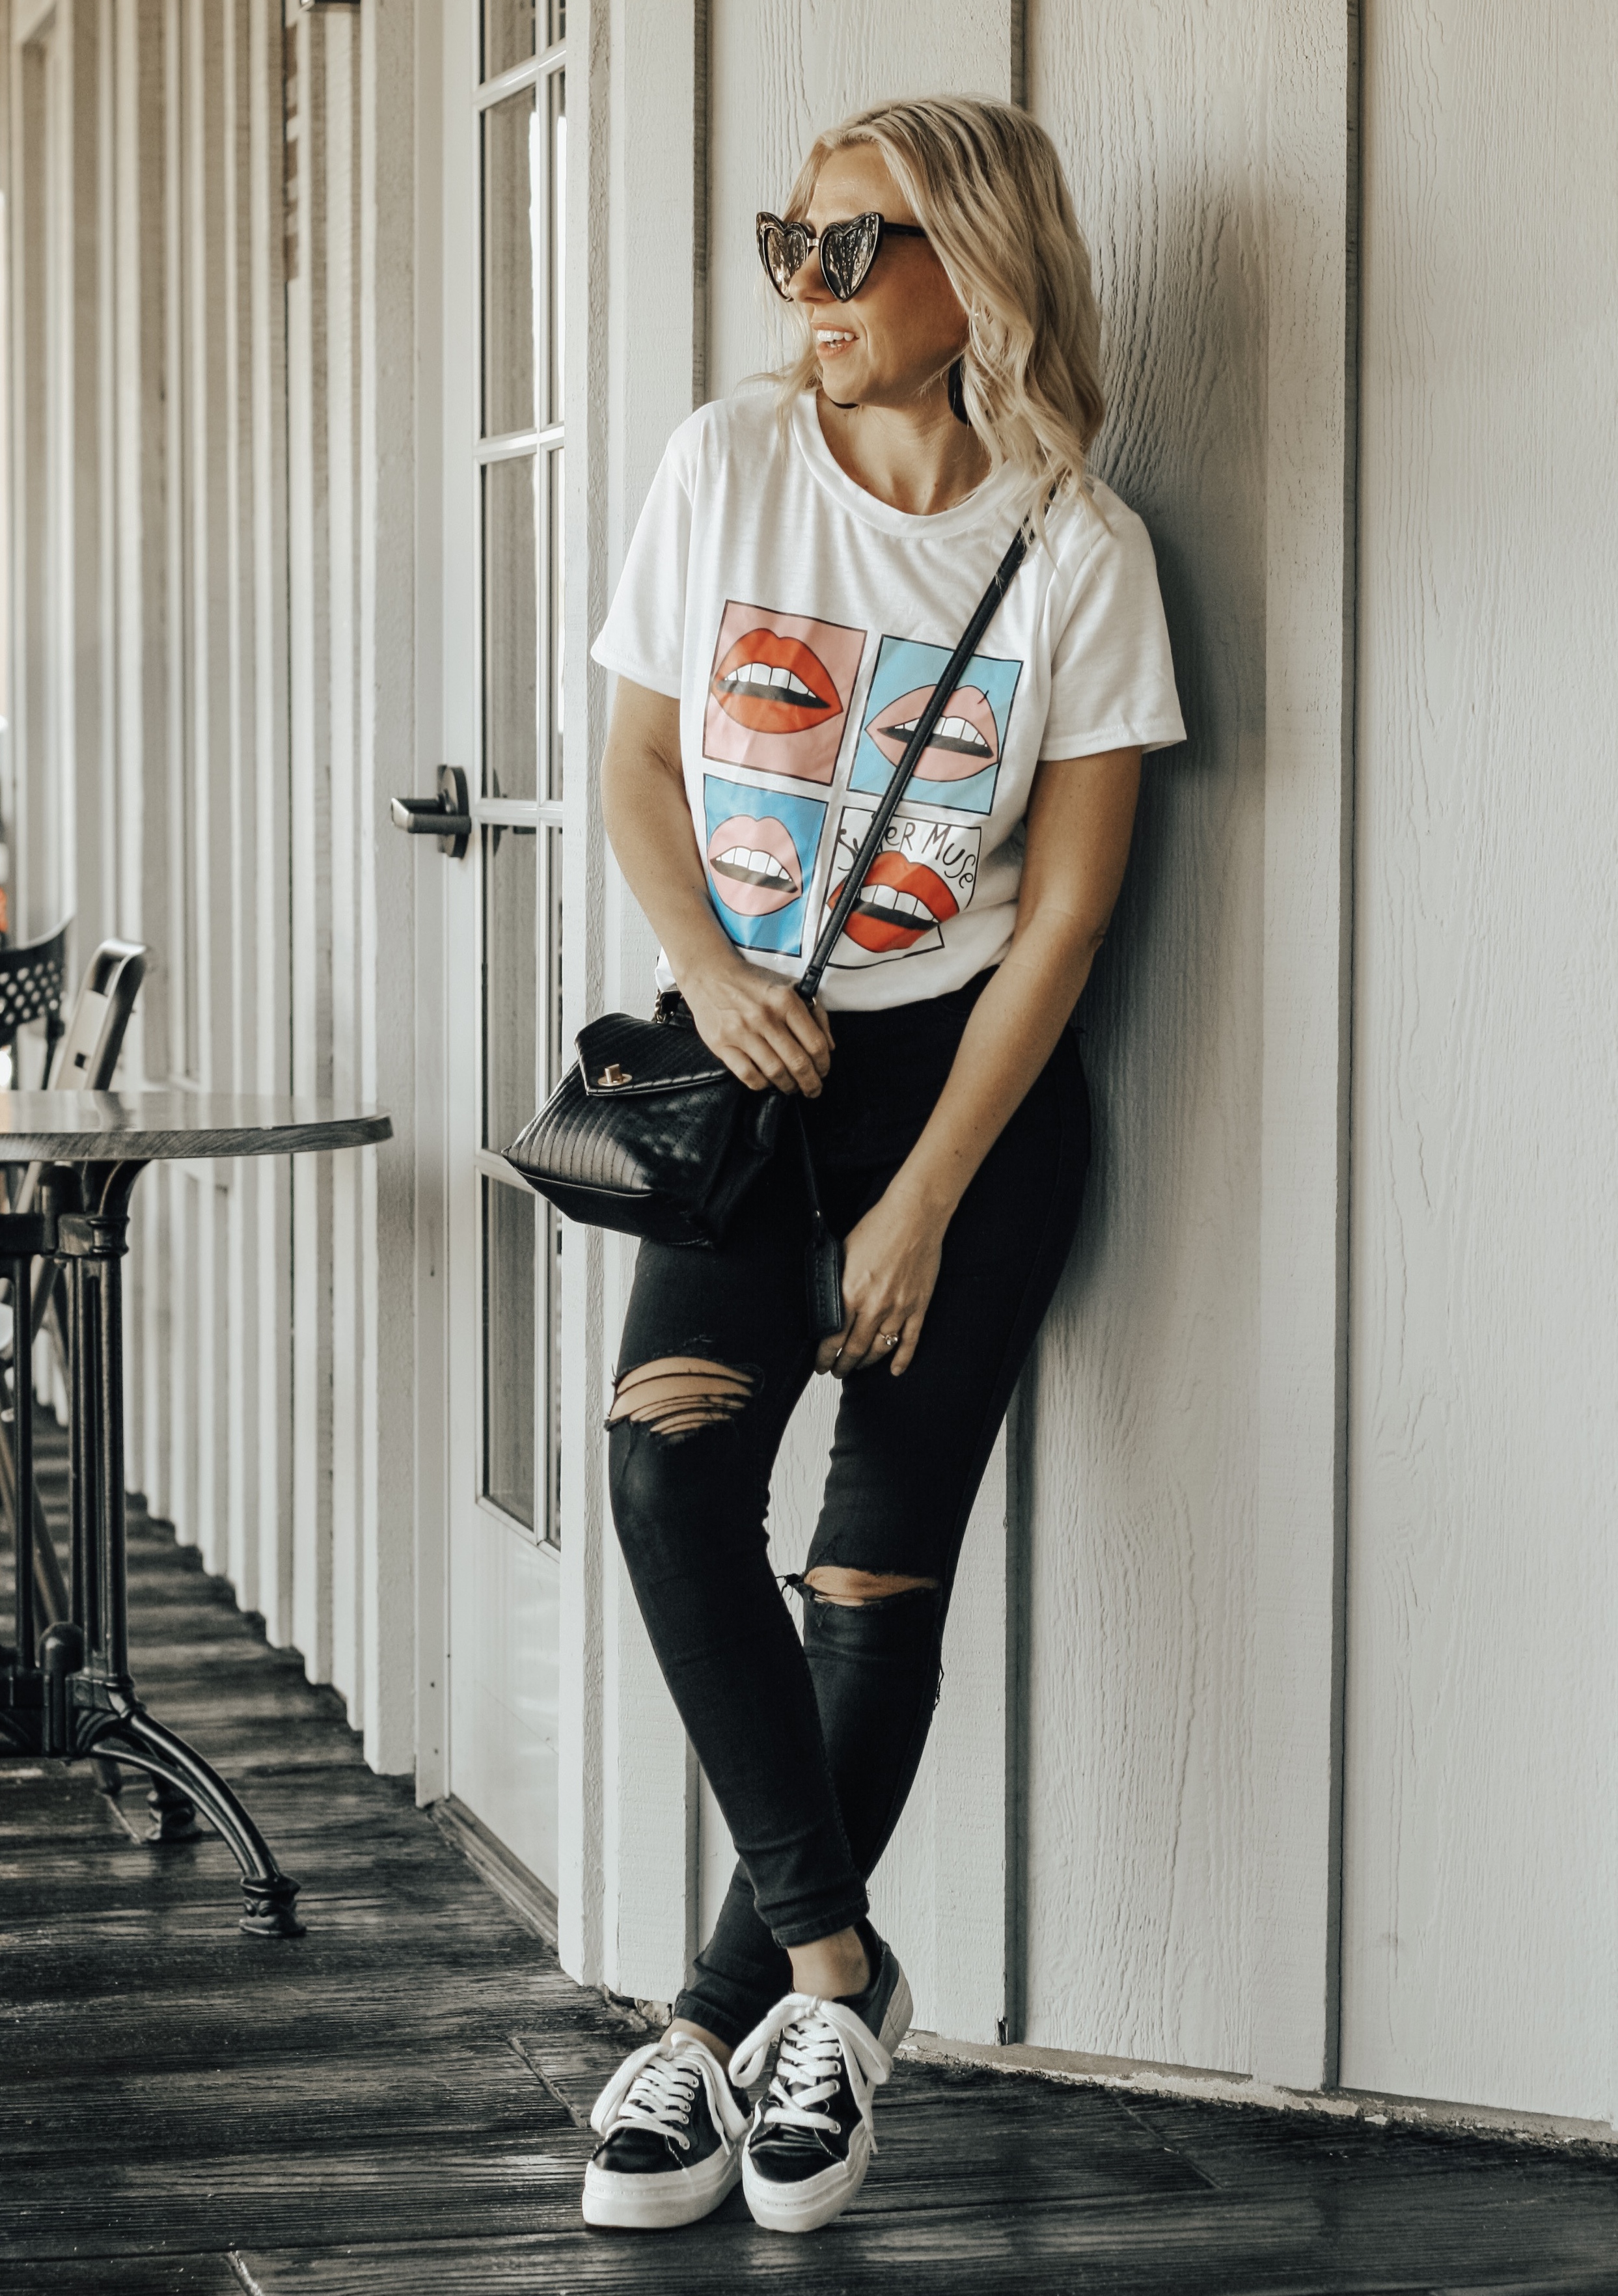 VALENTINE'S INSPIRED GRAPHIC TEES- Jaclyn De Leon Style + holiday style inspo + what to wear this Valentine's day + lips tee + heart tee + spring style + love + heart sunglasses + retro style + 90s fashion + Valentine's style + mom fashion